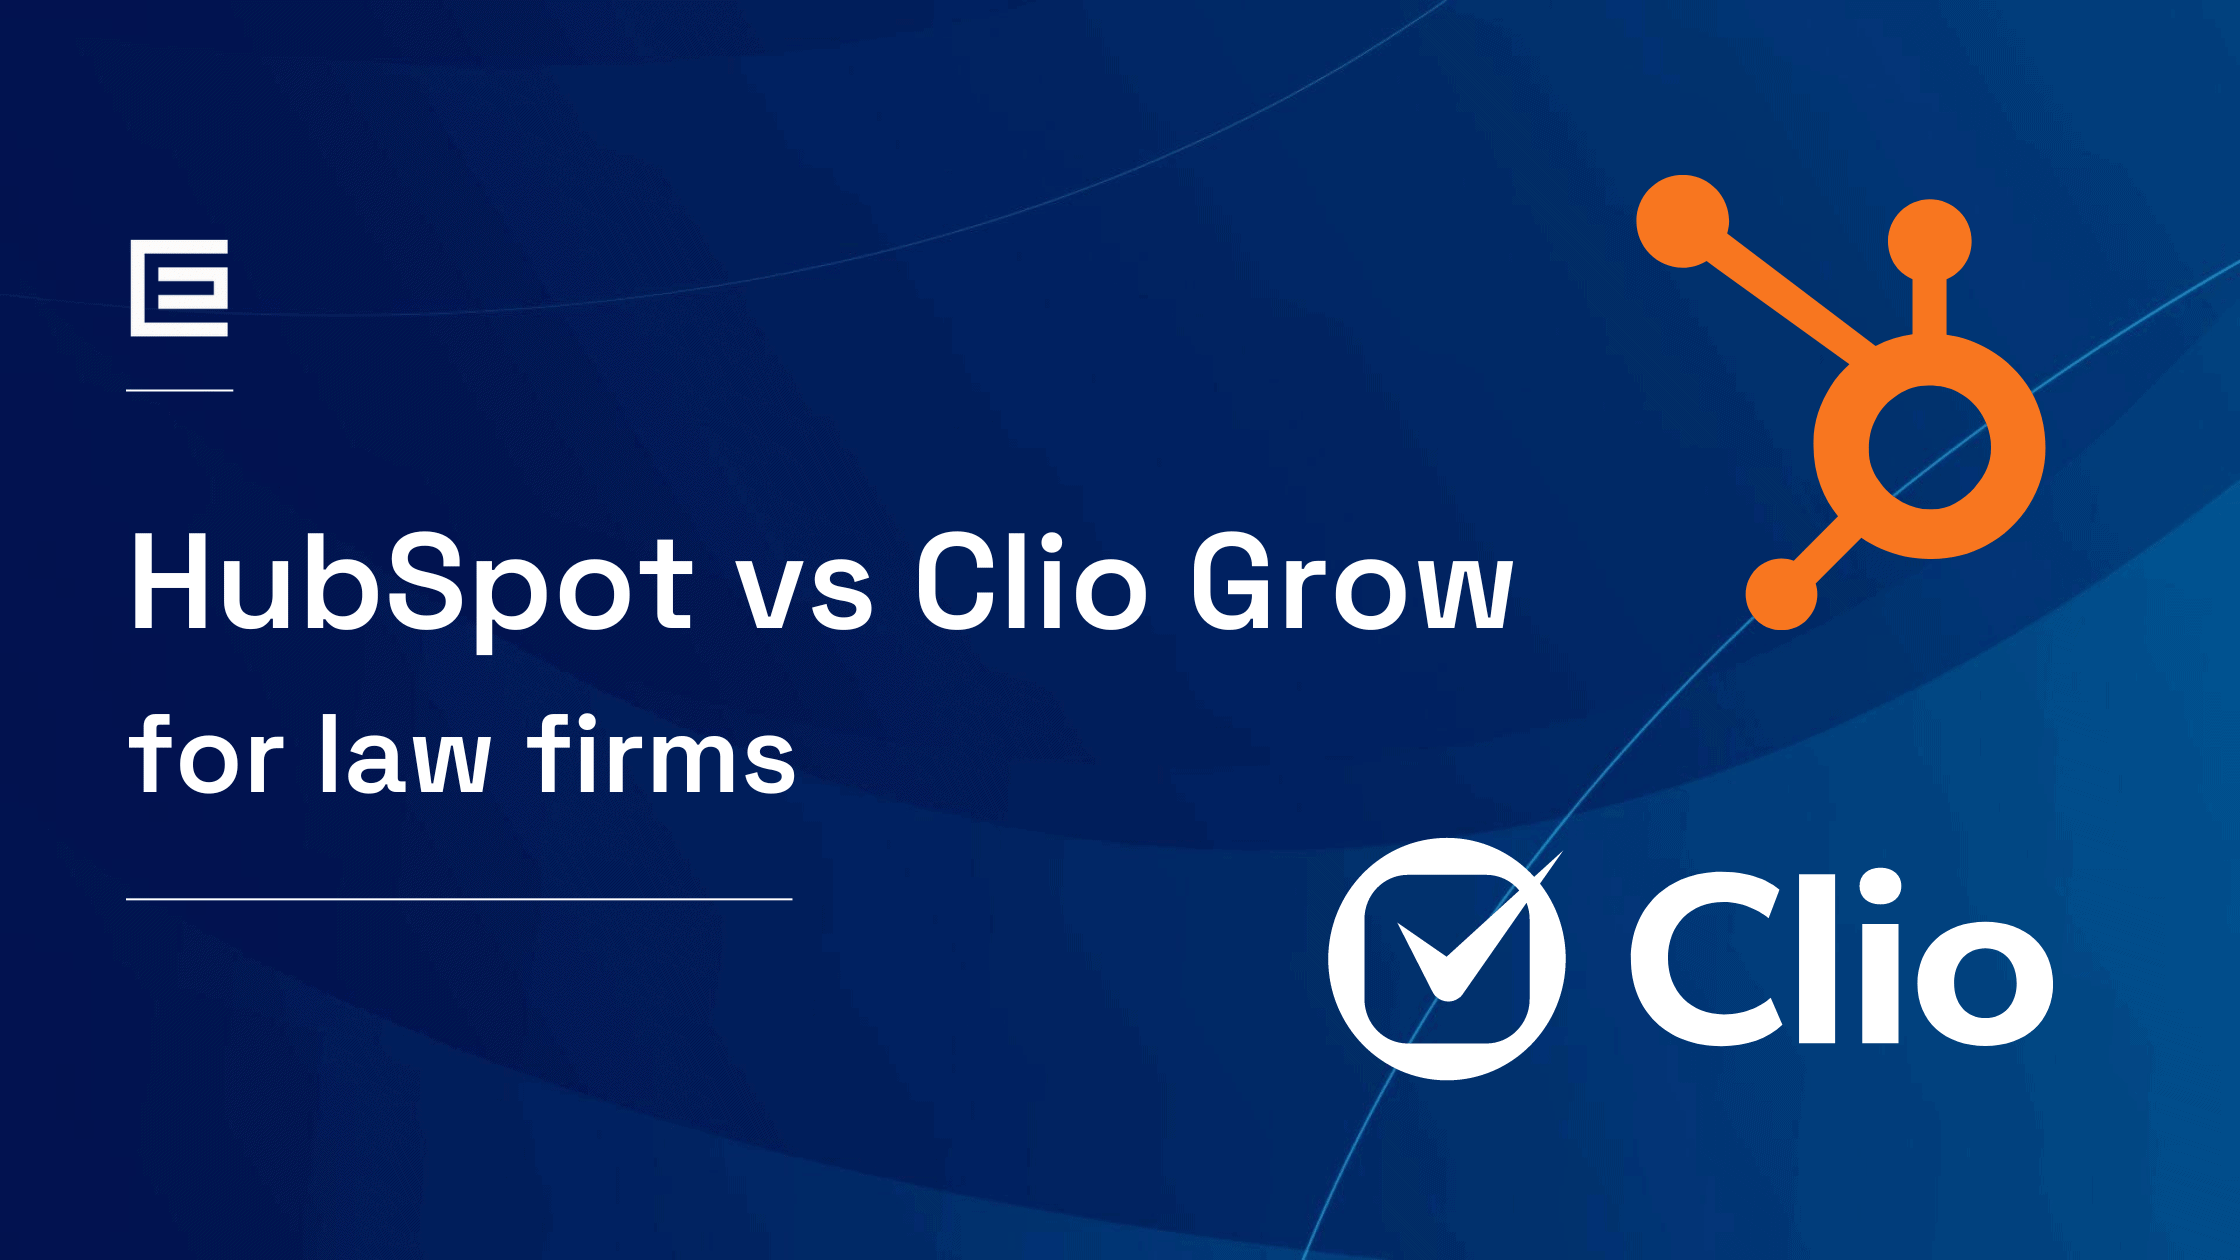 HubSpot vs Clio Grow for law firms